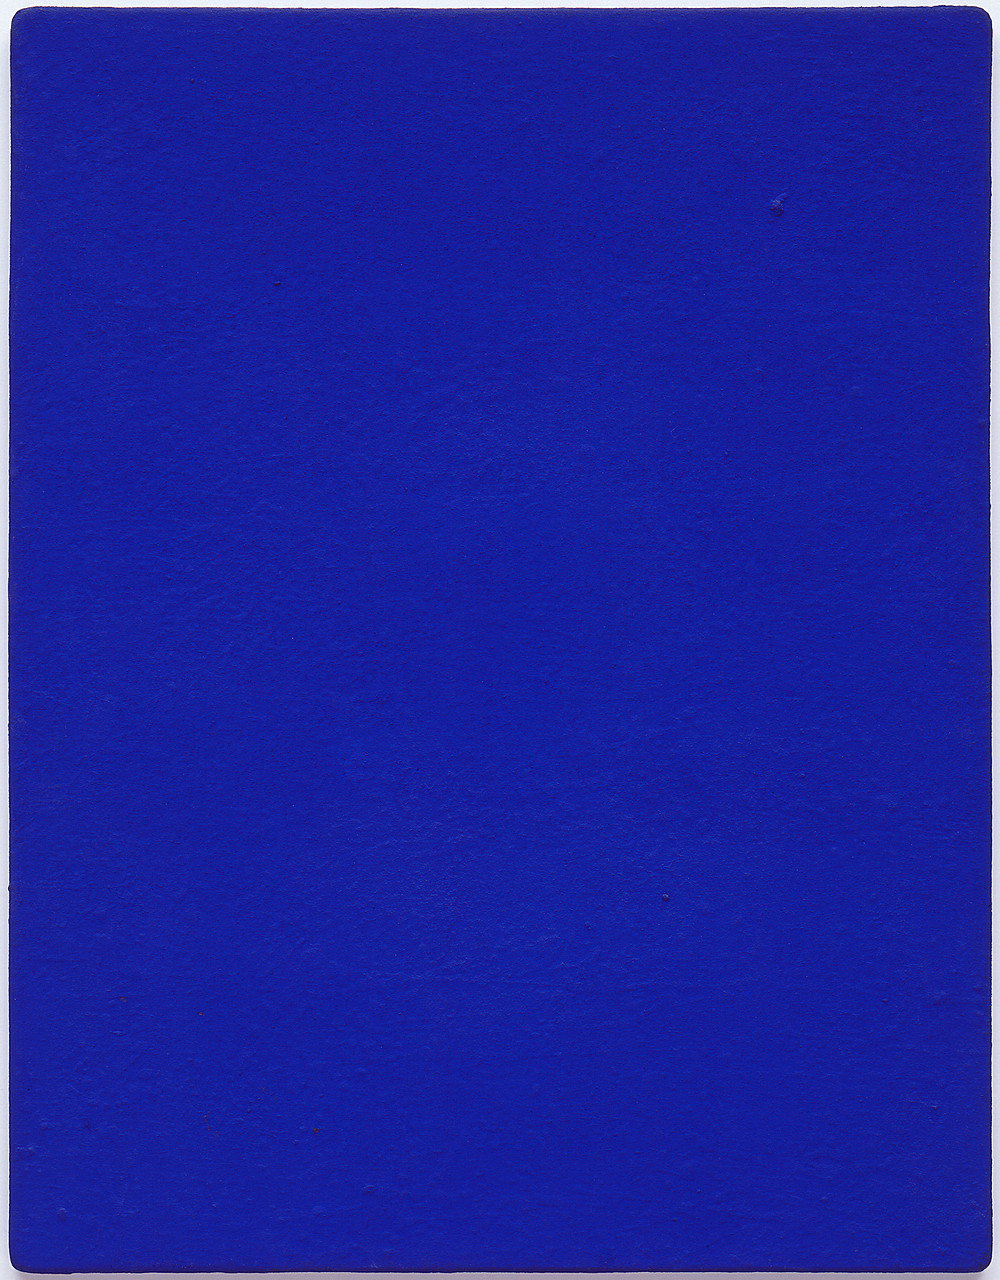 Blue Paper, Object Shows Community